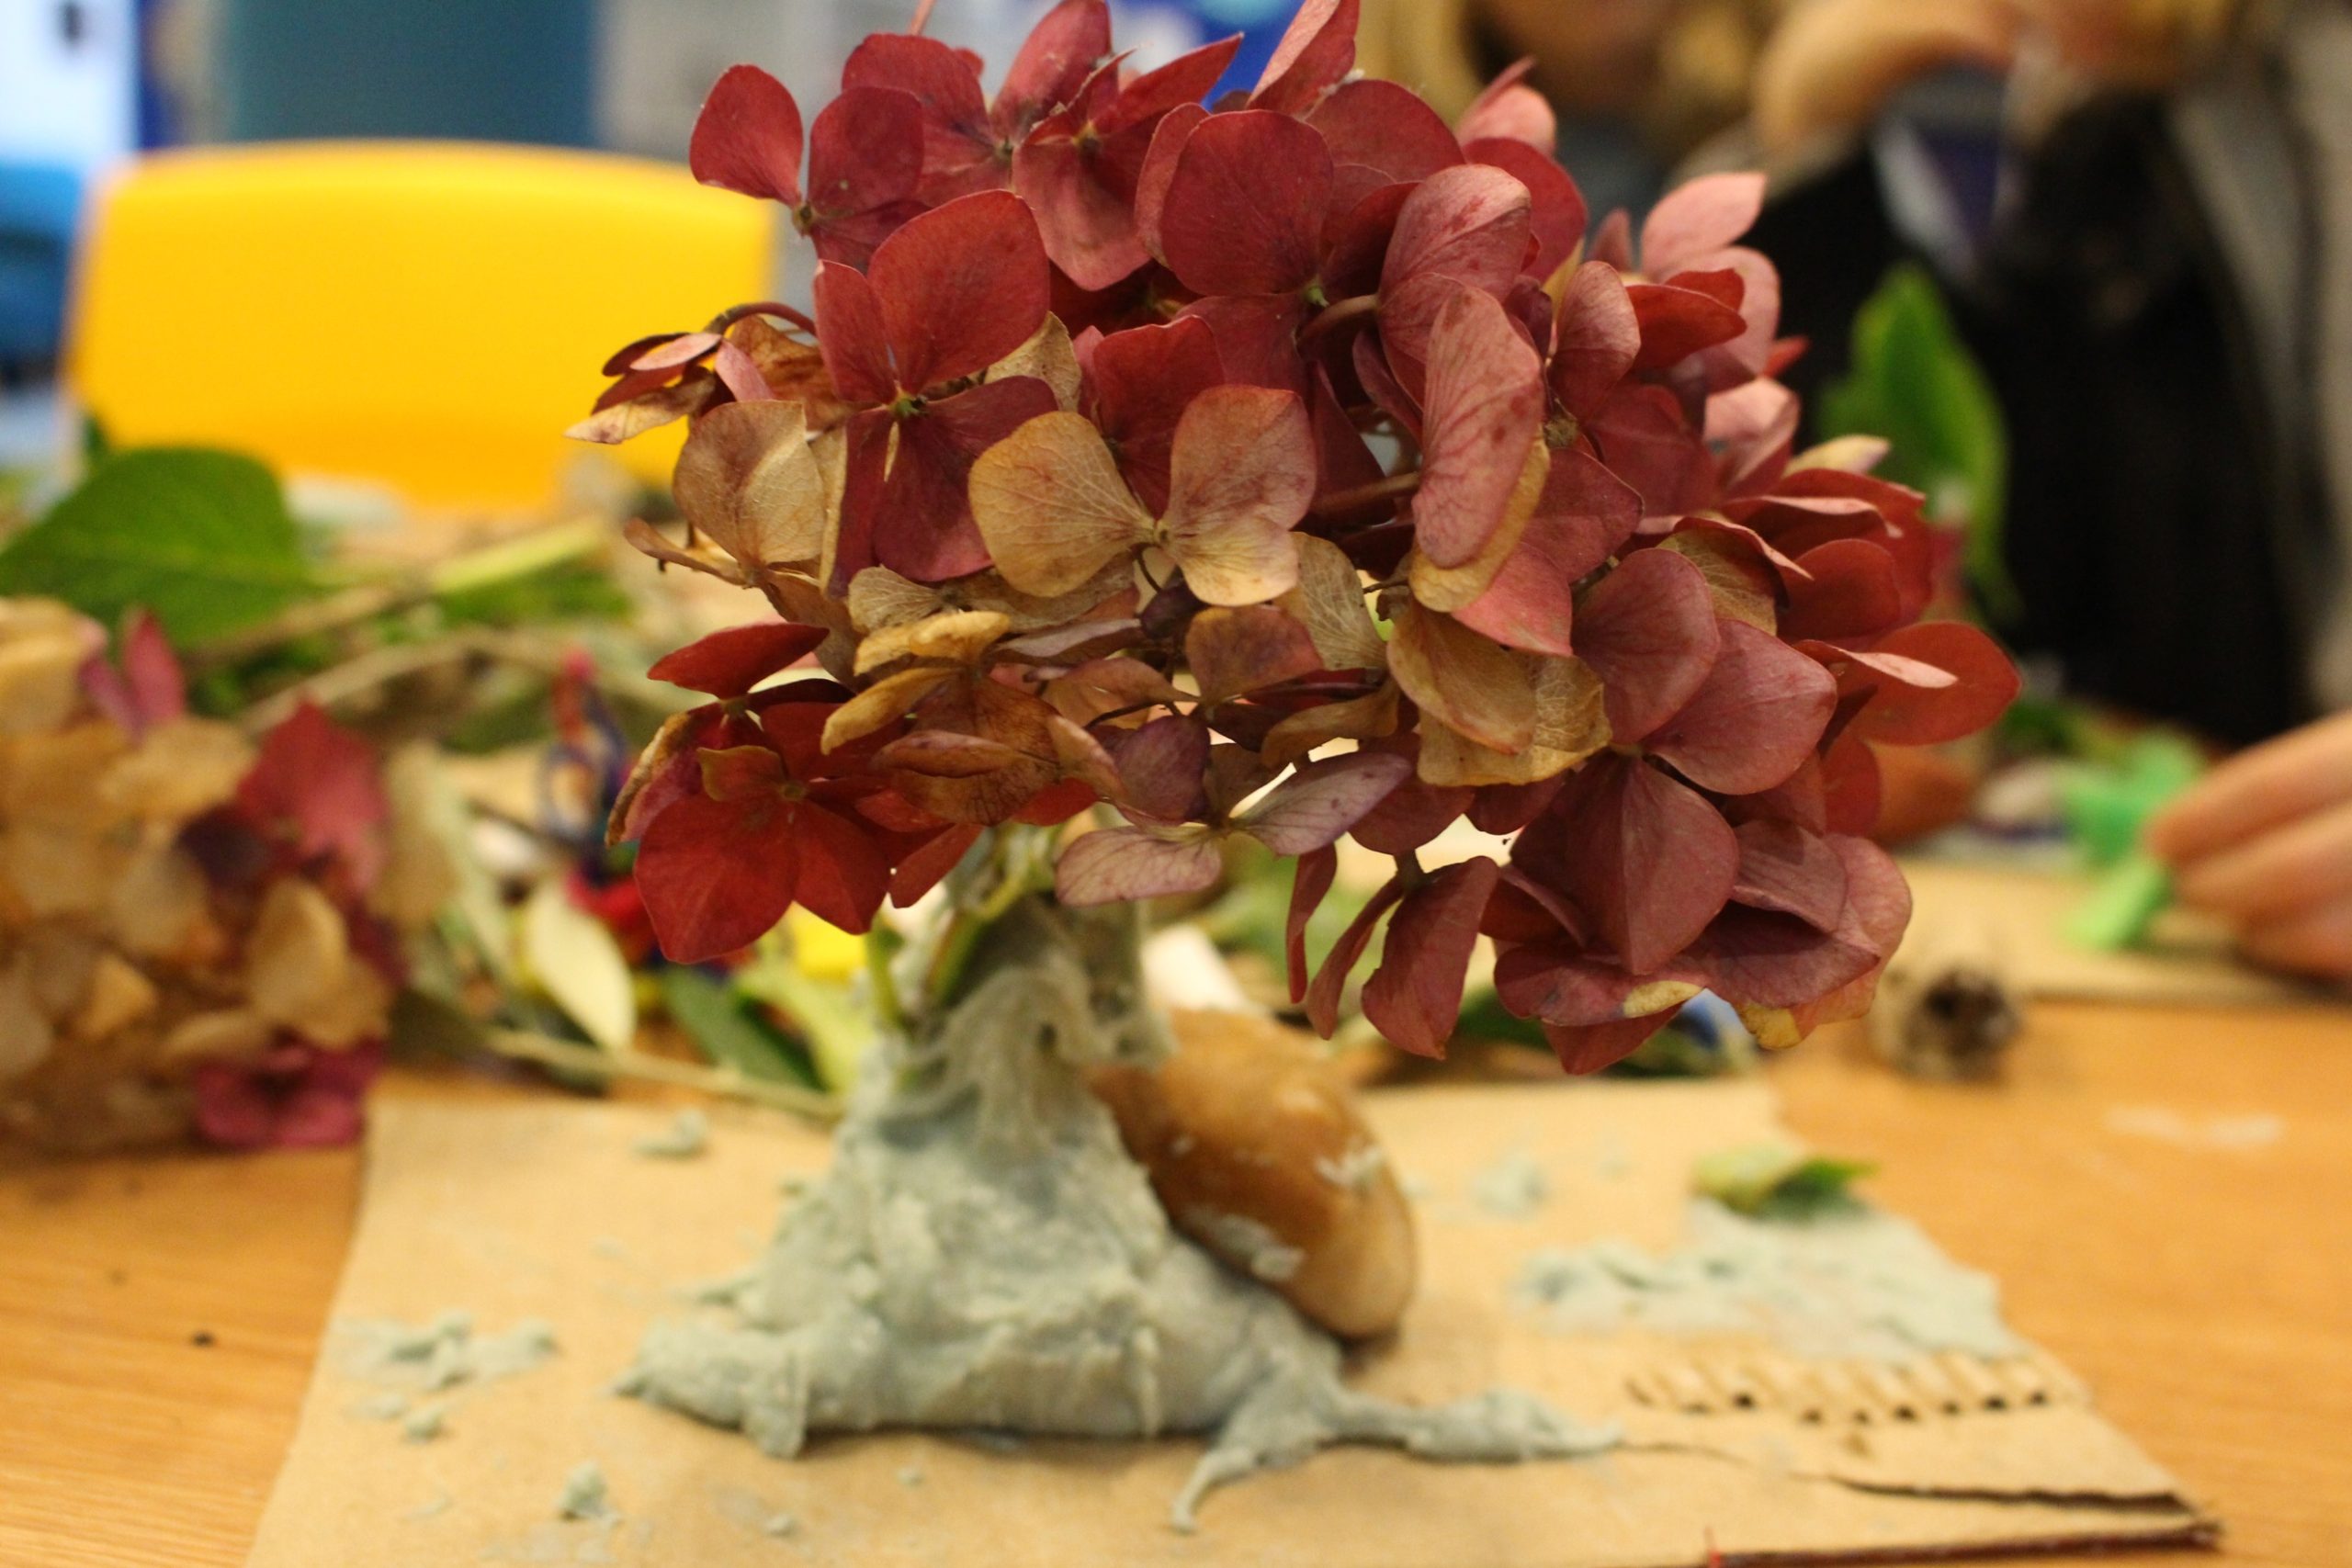 Photograph of a desk with a small sculpture of a tree crafted from a hydrangea flower and saltdough